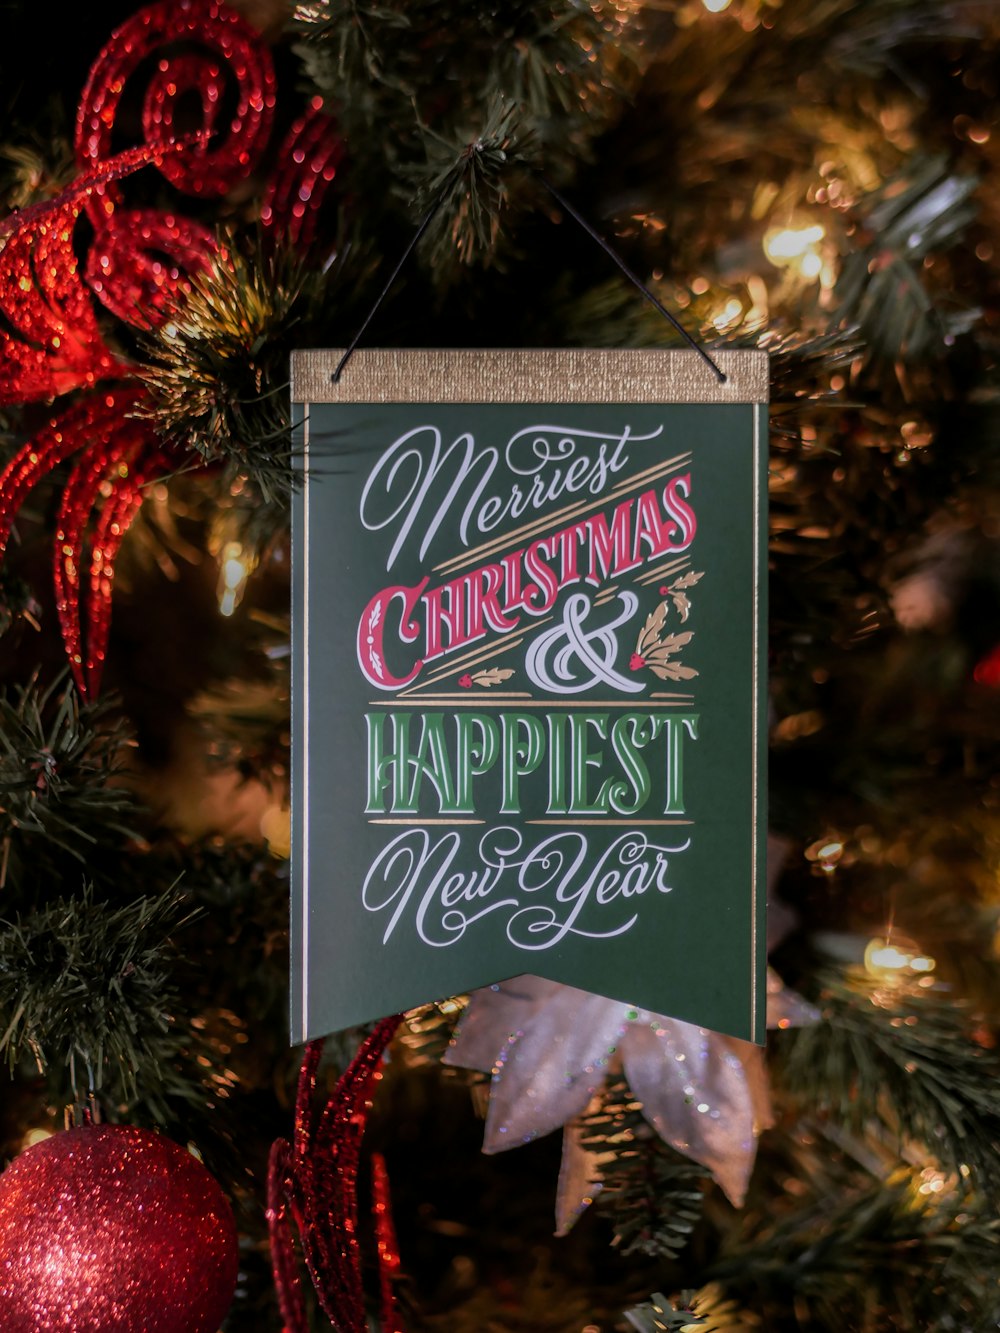 selective focus photography of Merriest Christmas & Happiest New Year sign